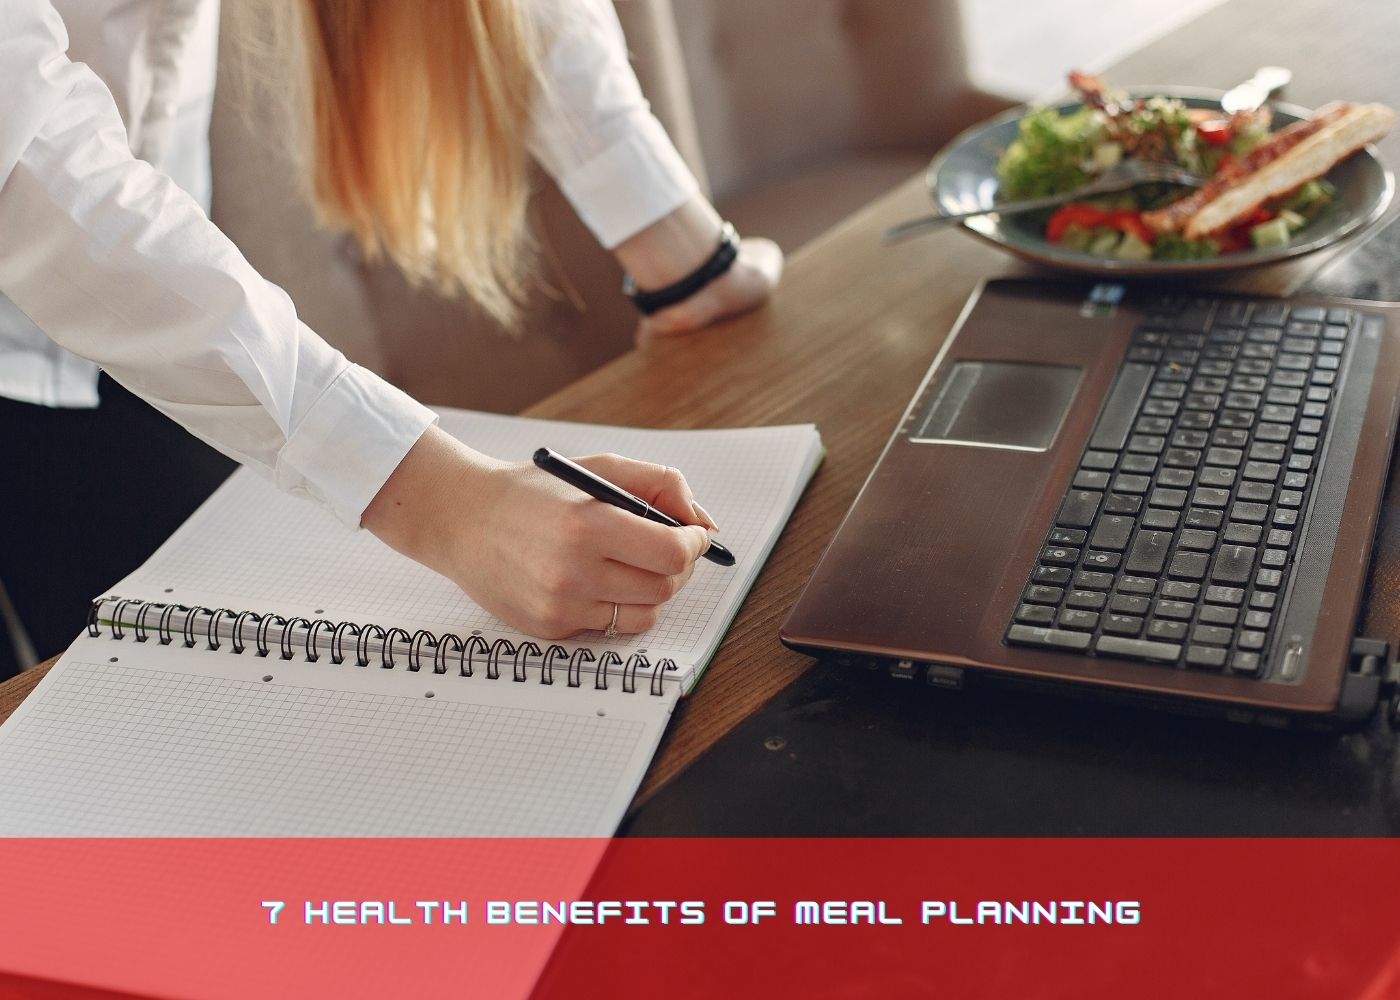 7 Health Benefits of Meal Planning